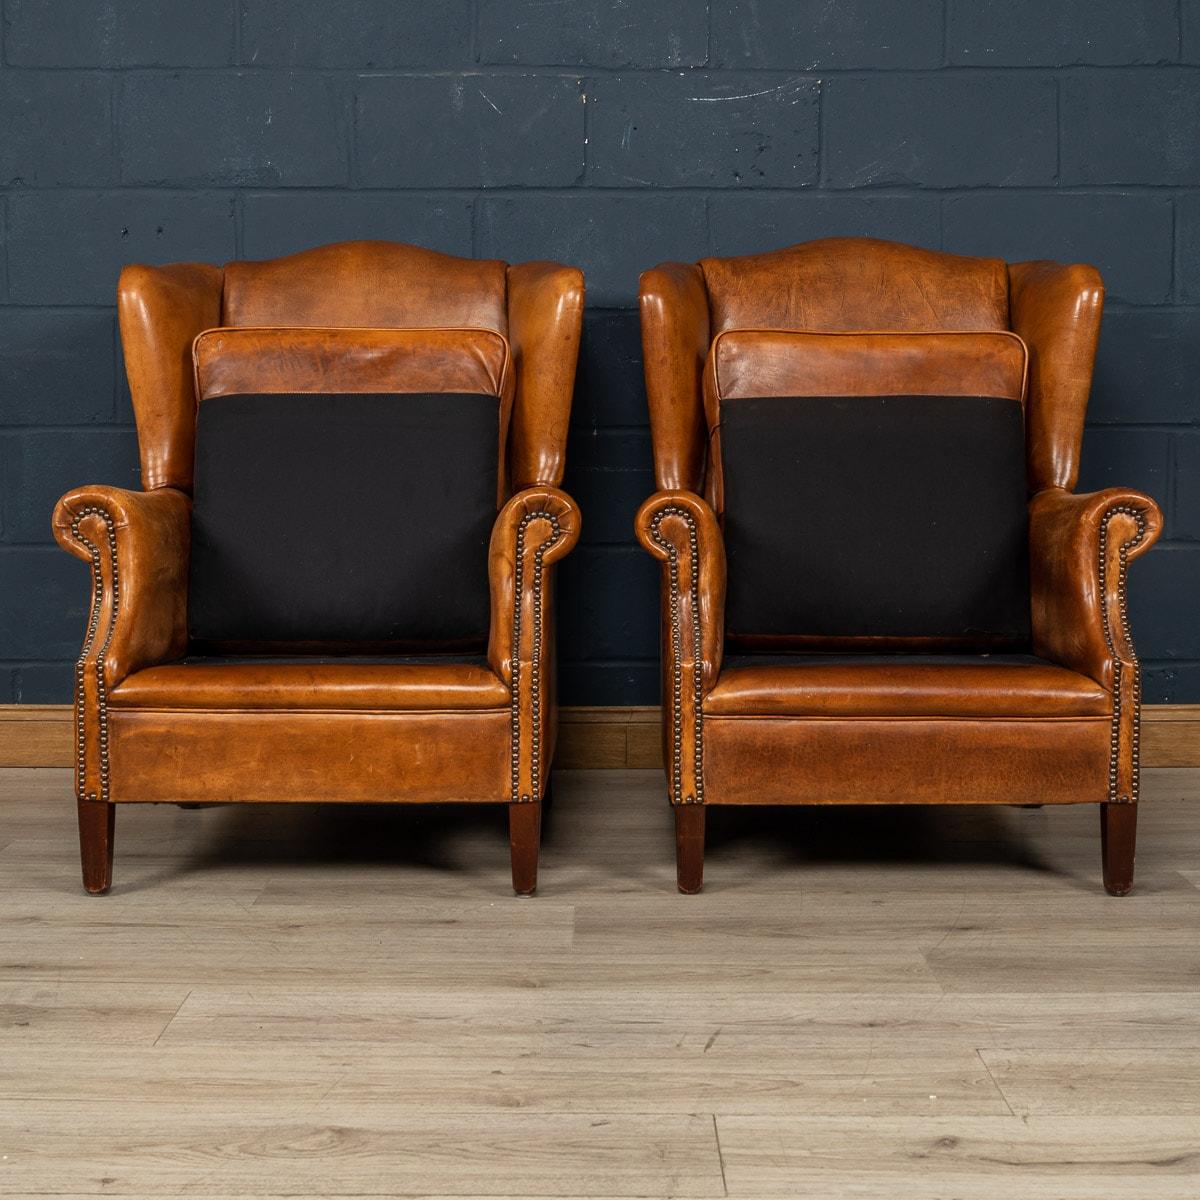 20th Century Dutch Sheepskin Leather Wing-Back Armchairs For Sale 3